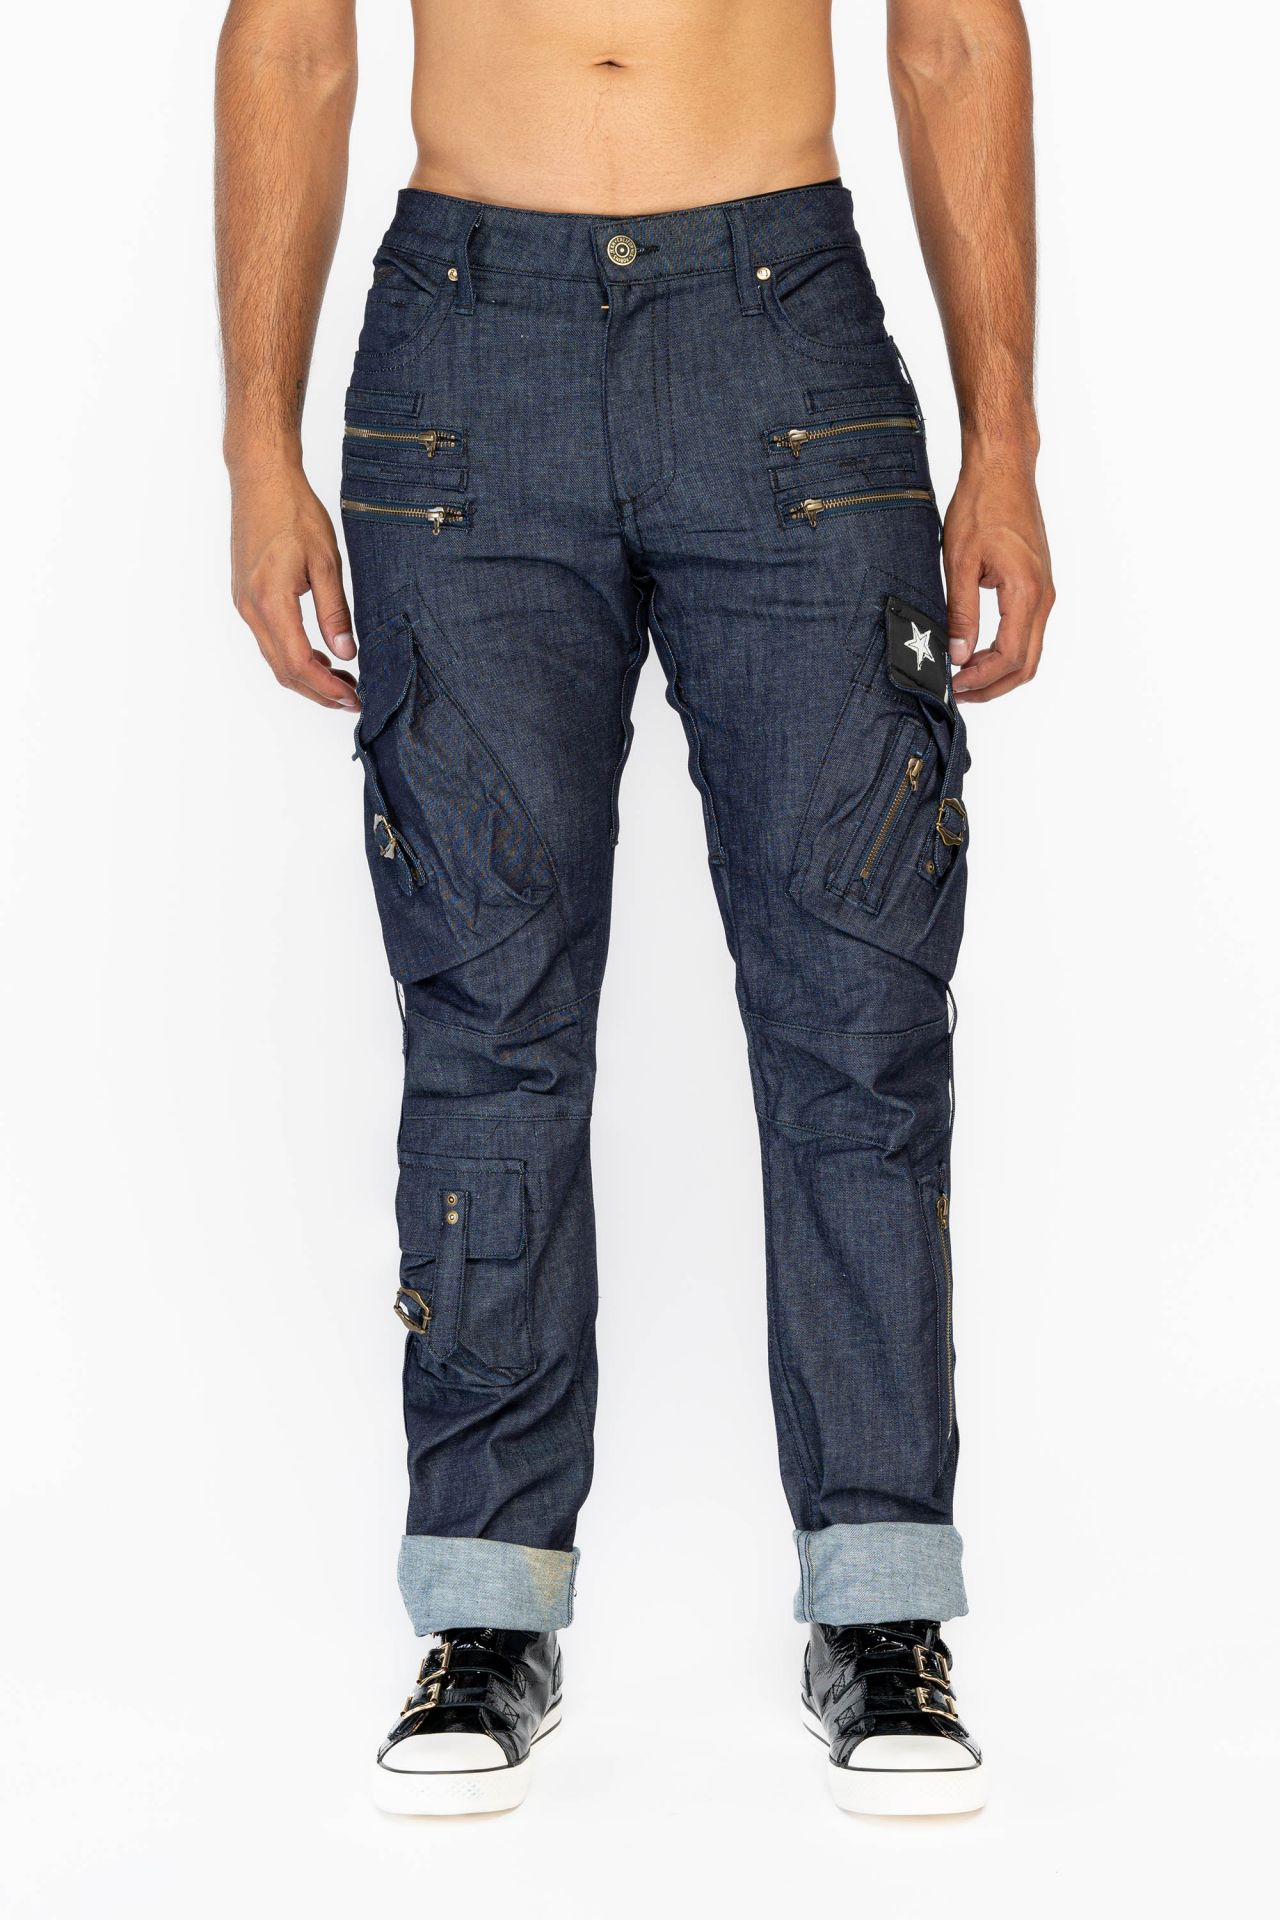 RAW DENIM COLLECTION RAPTOR MENS MILITARY STYLE JEANS WITH LEATHER POCKET